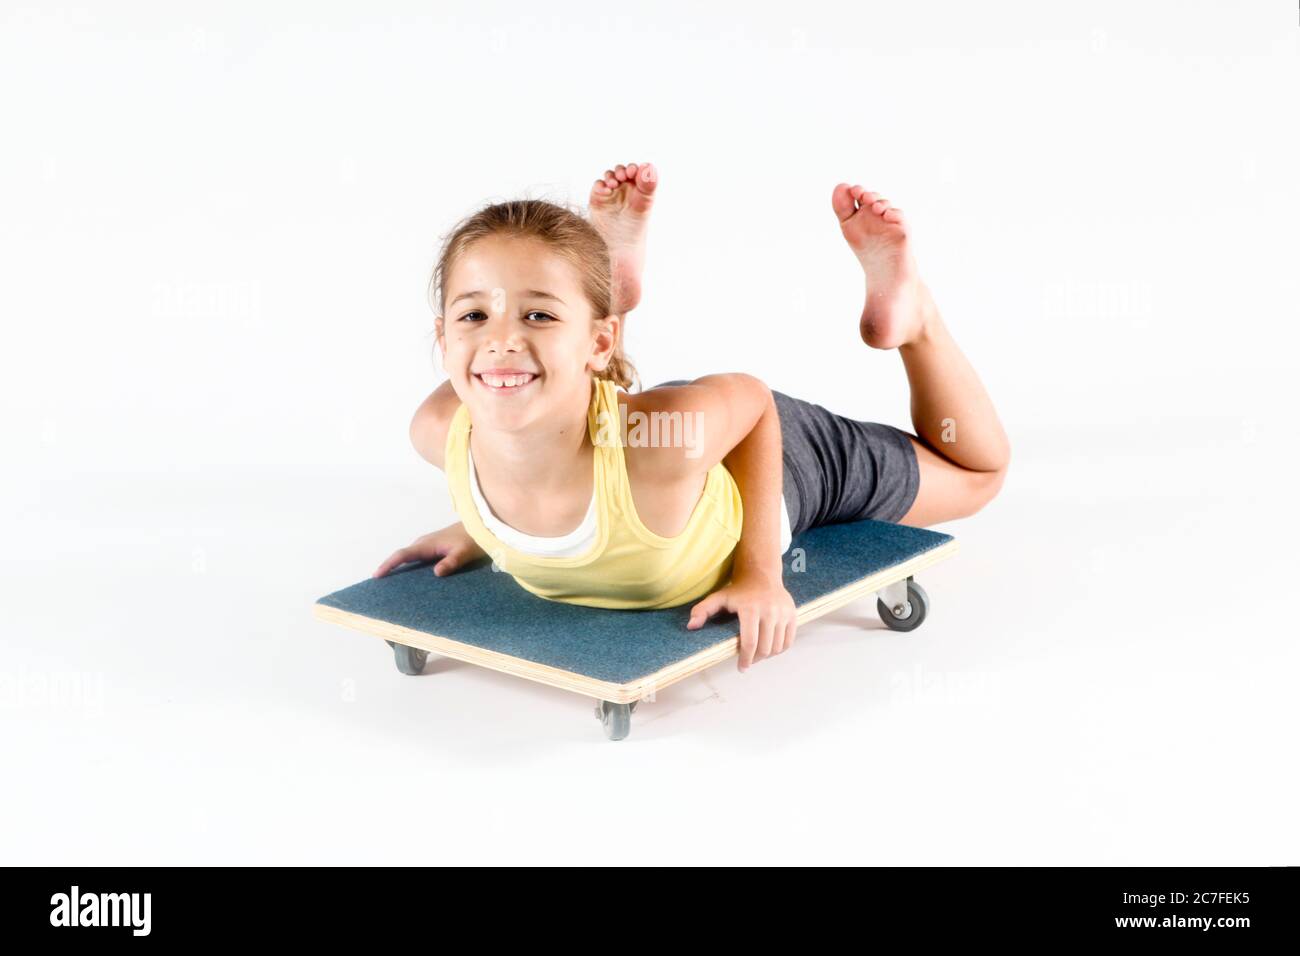 Indoor playground girl plays on wheeled board On white Background Stock Photo